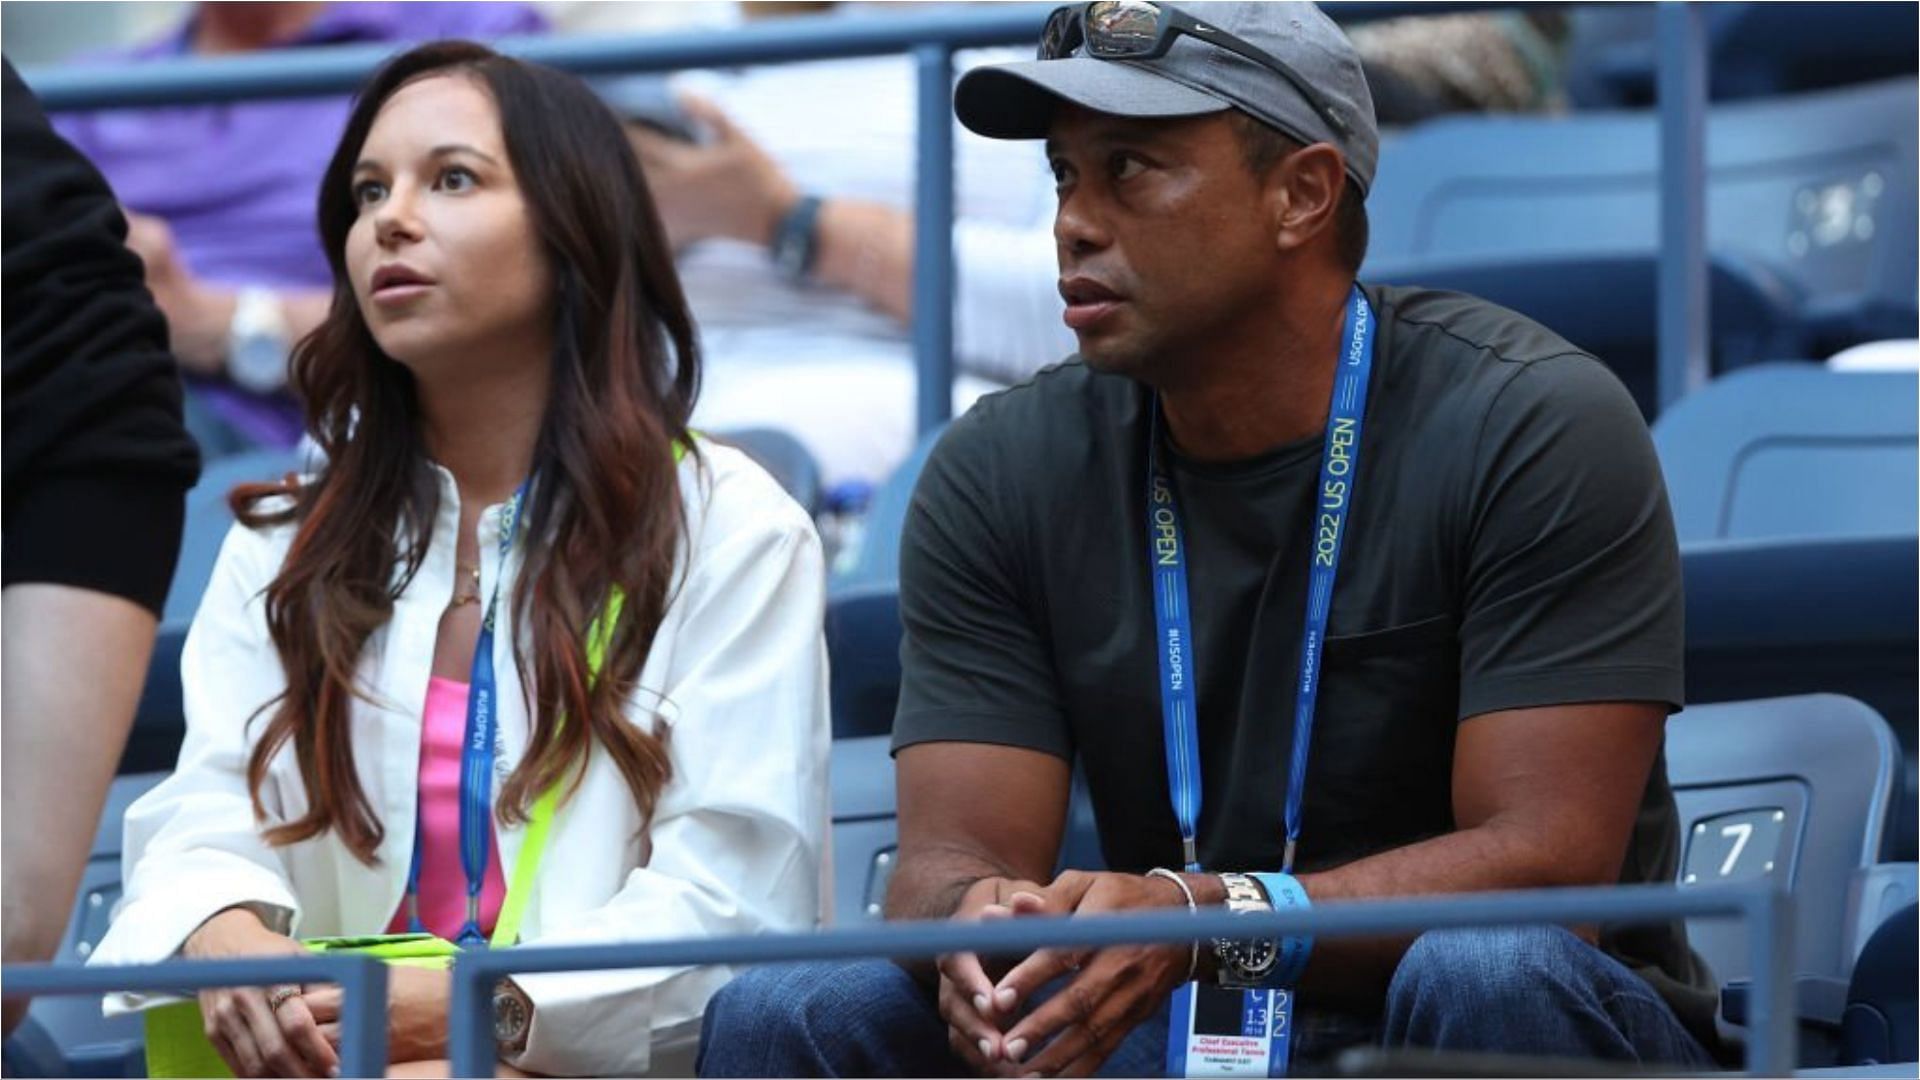 Erica Herman has filed a lawsuit seeking $30 million from Tiger Woods (Image via Matthew Stockman/Getty Images)